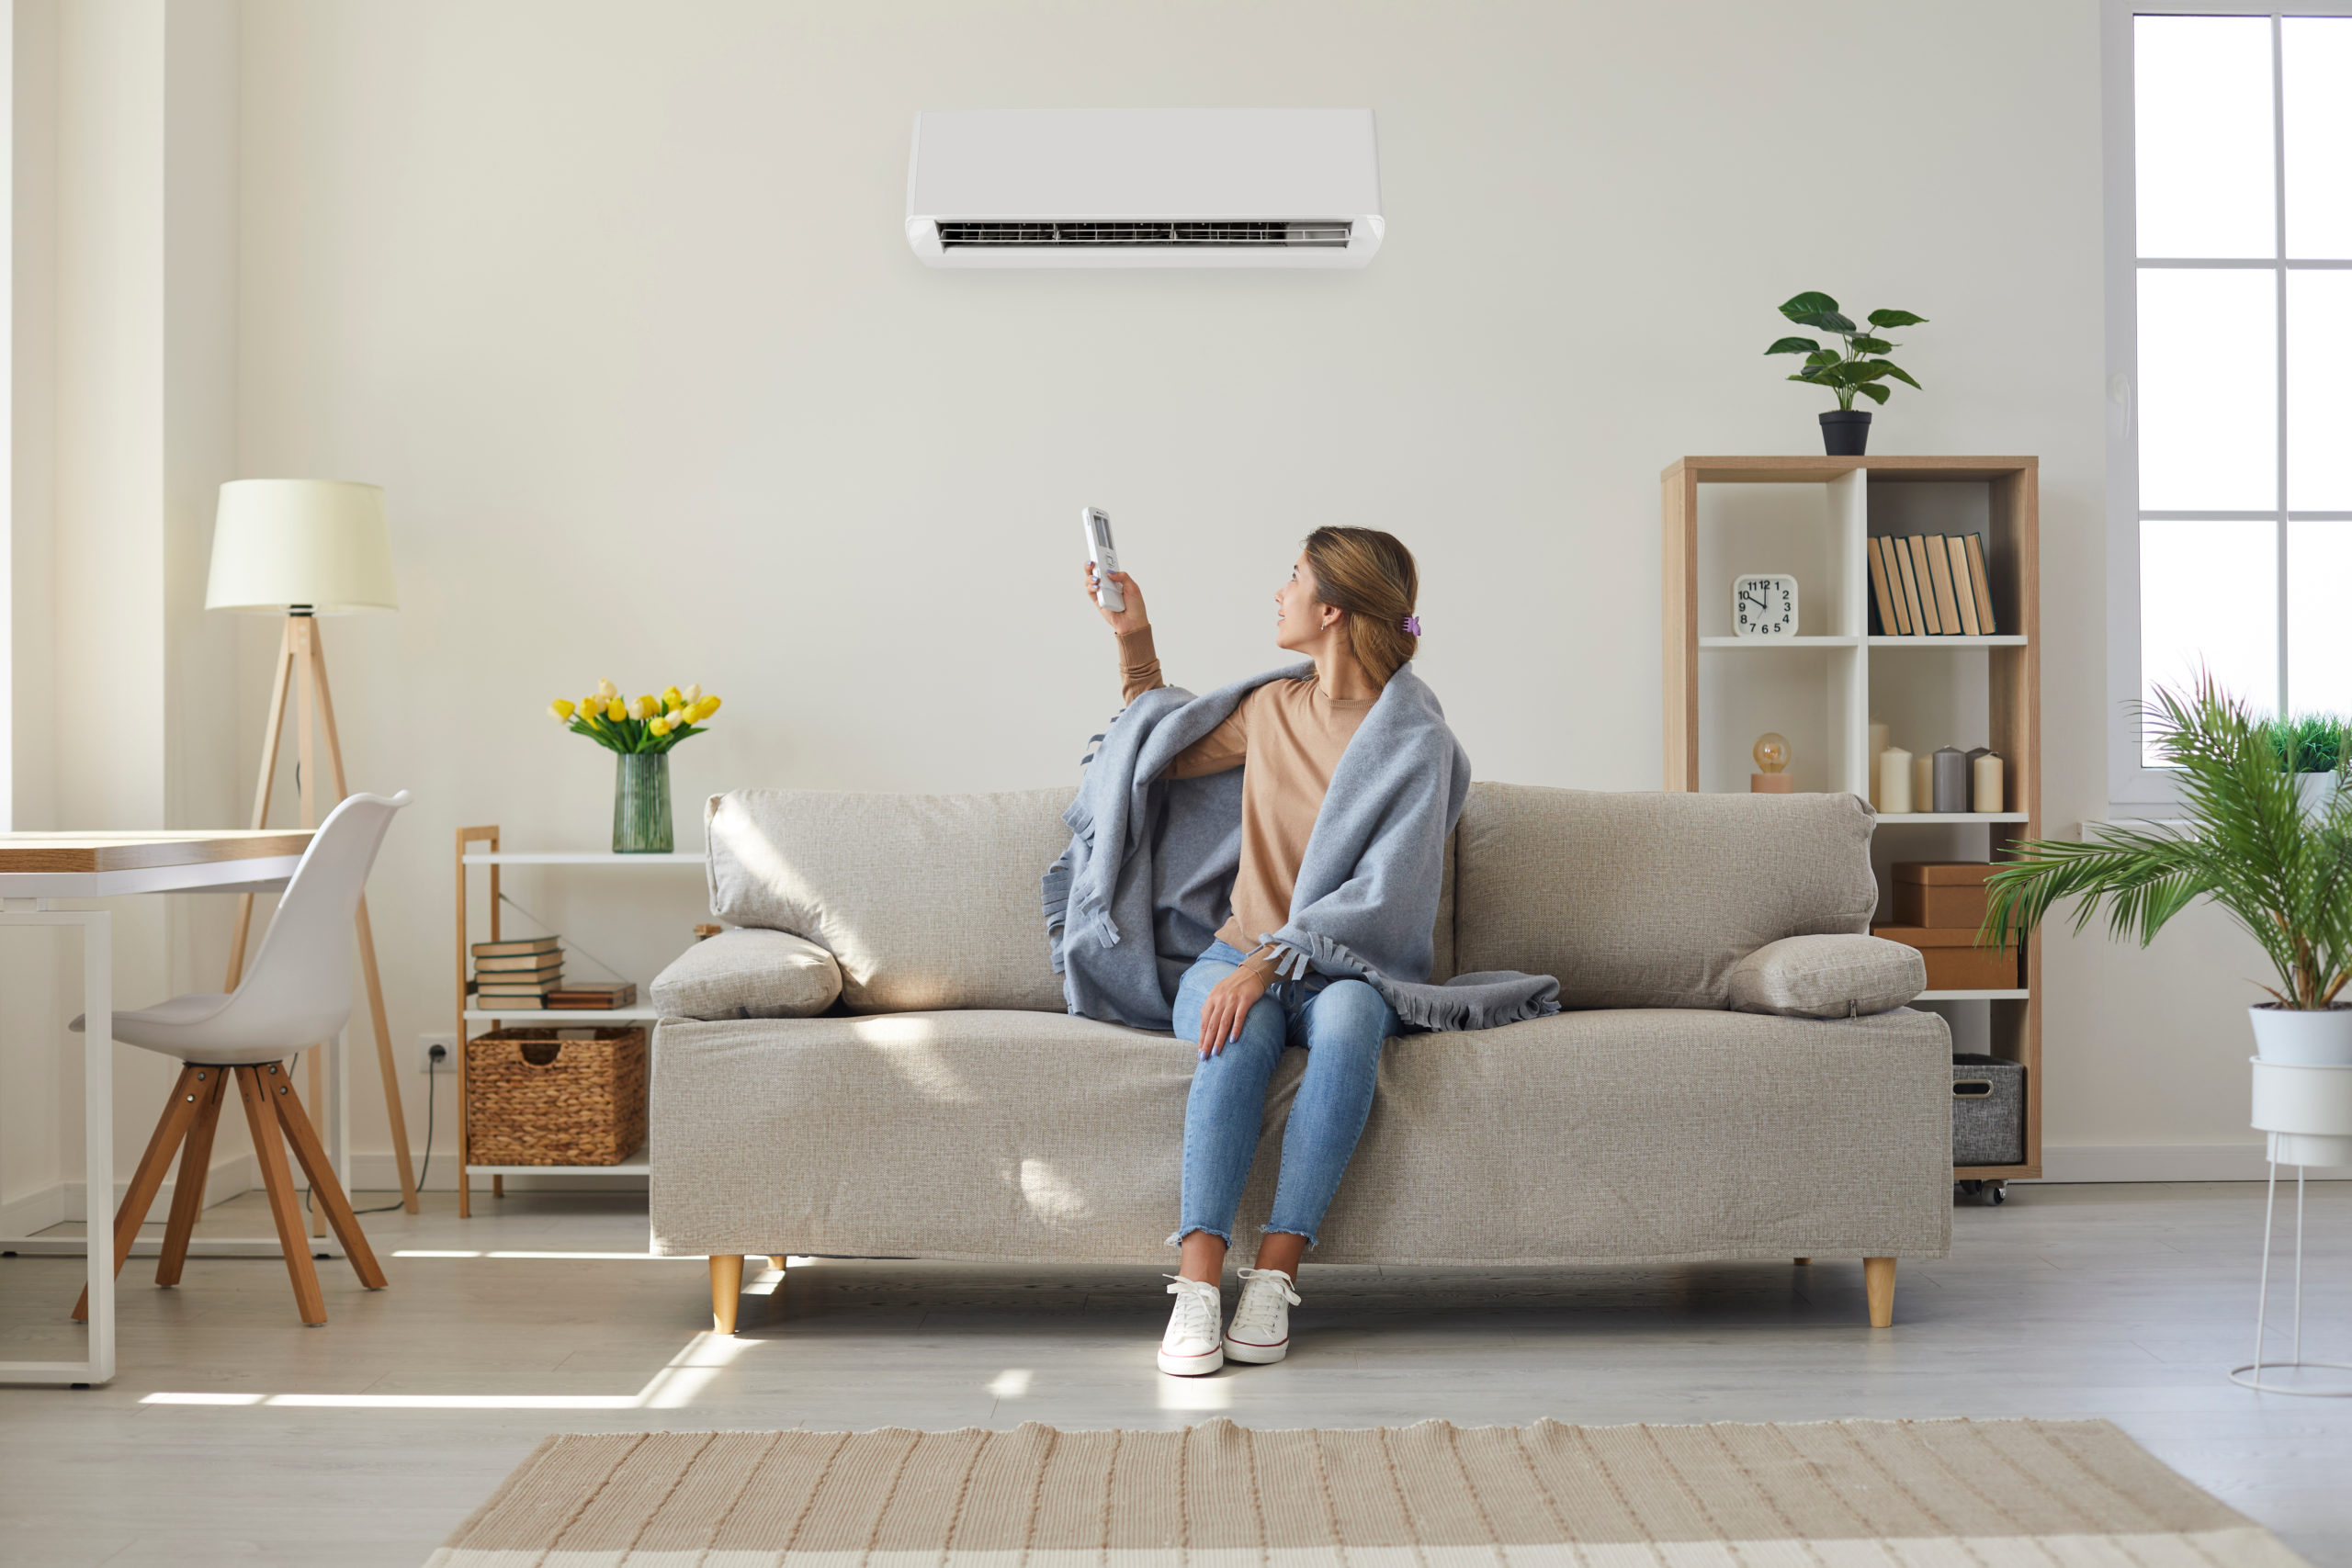 Indoor Air Quality Matters